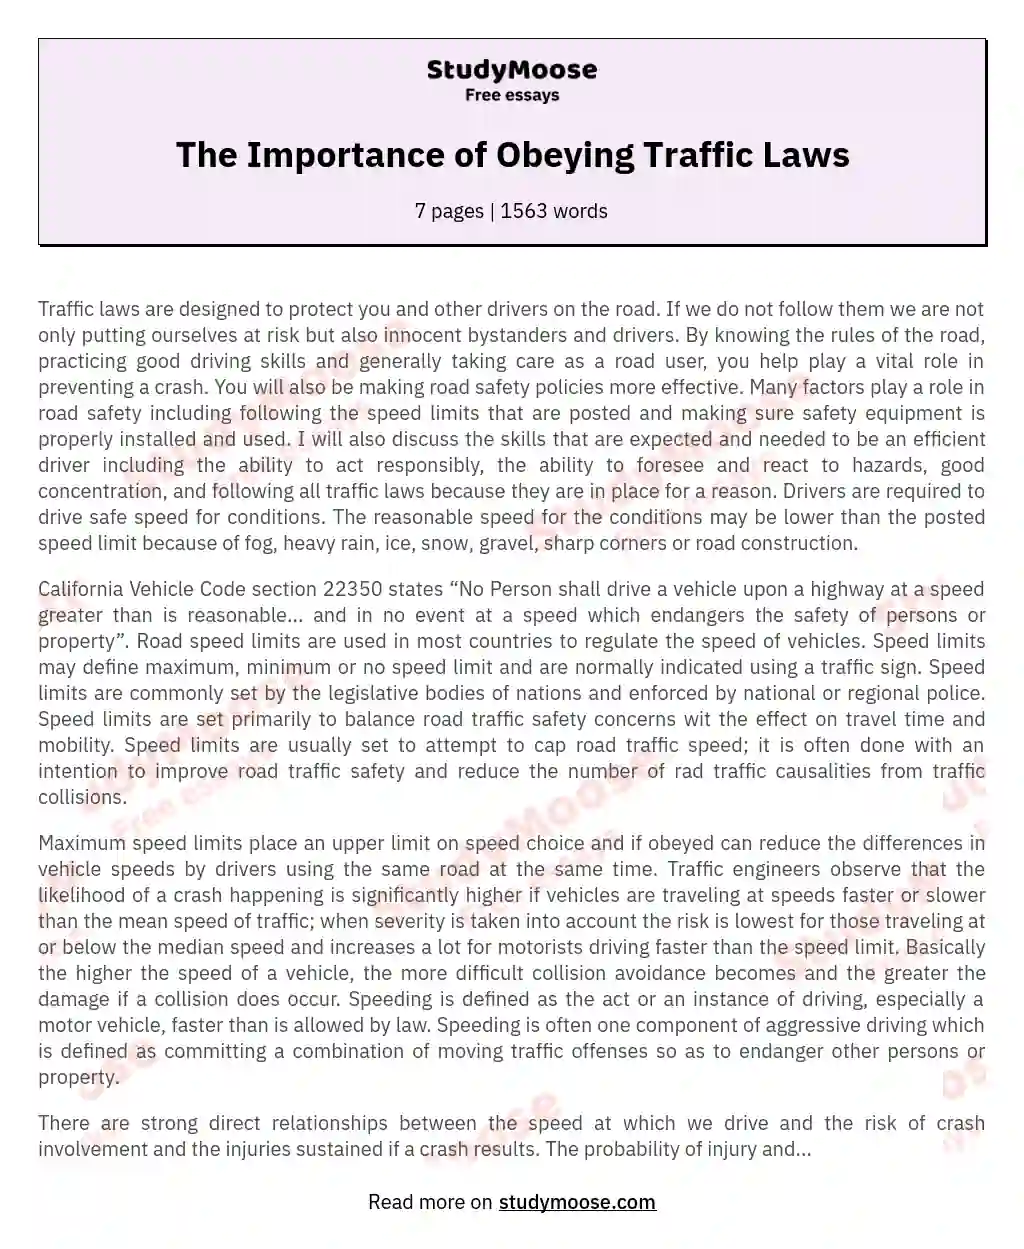 The Importance of Obeying Traffic Laws essay